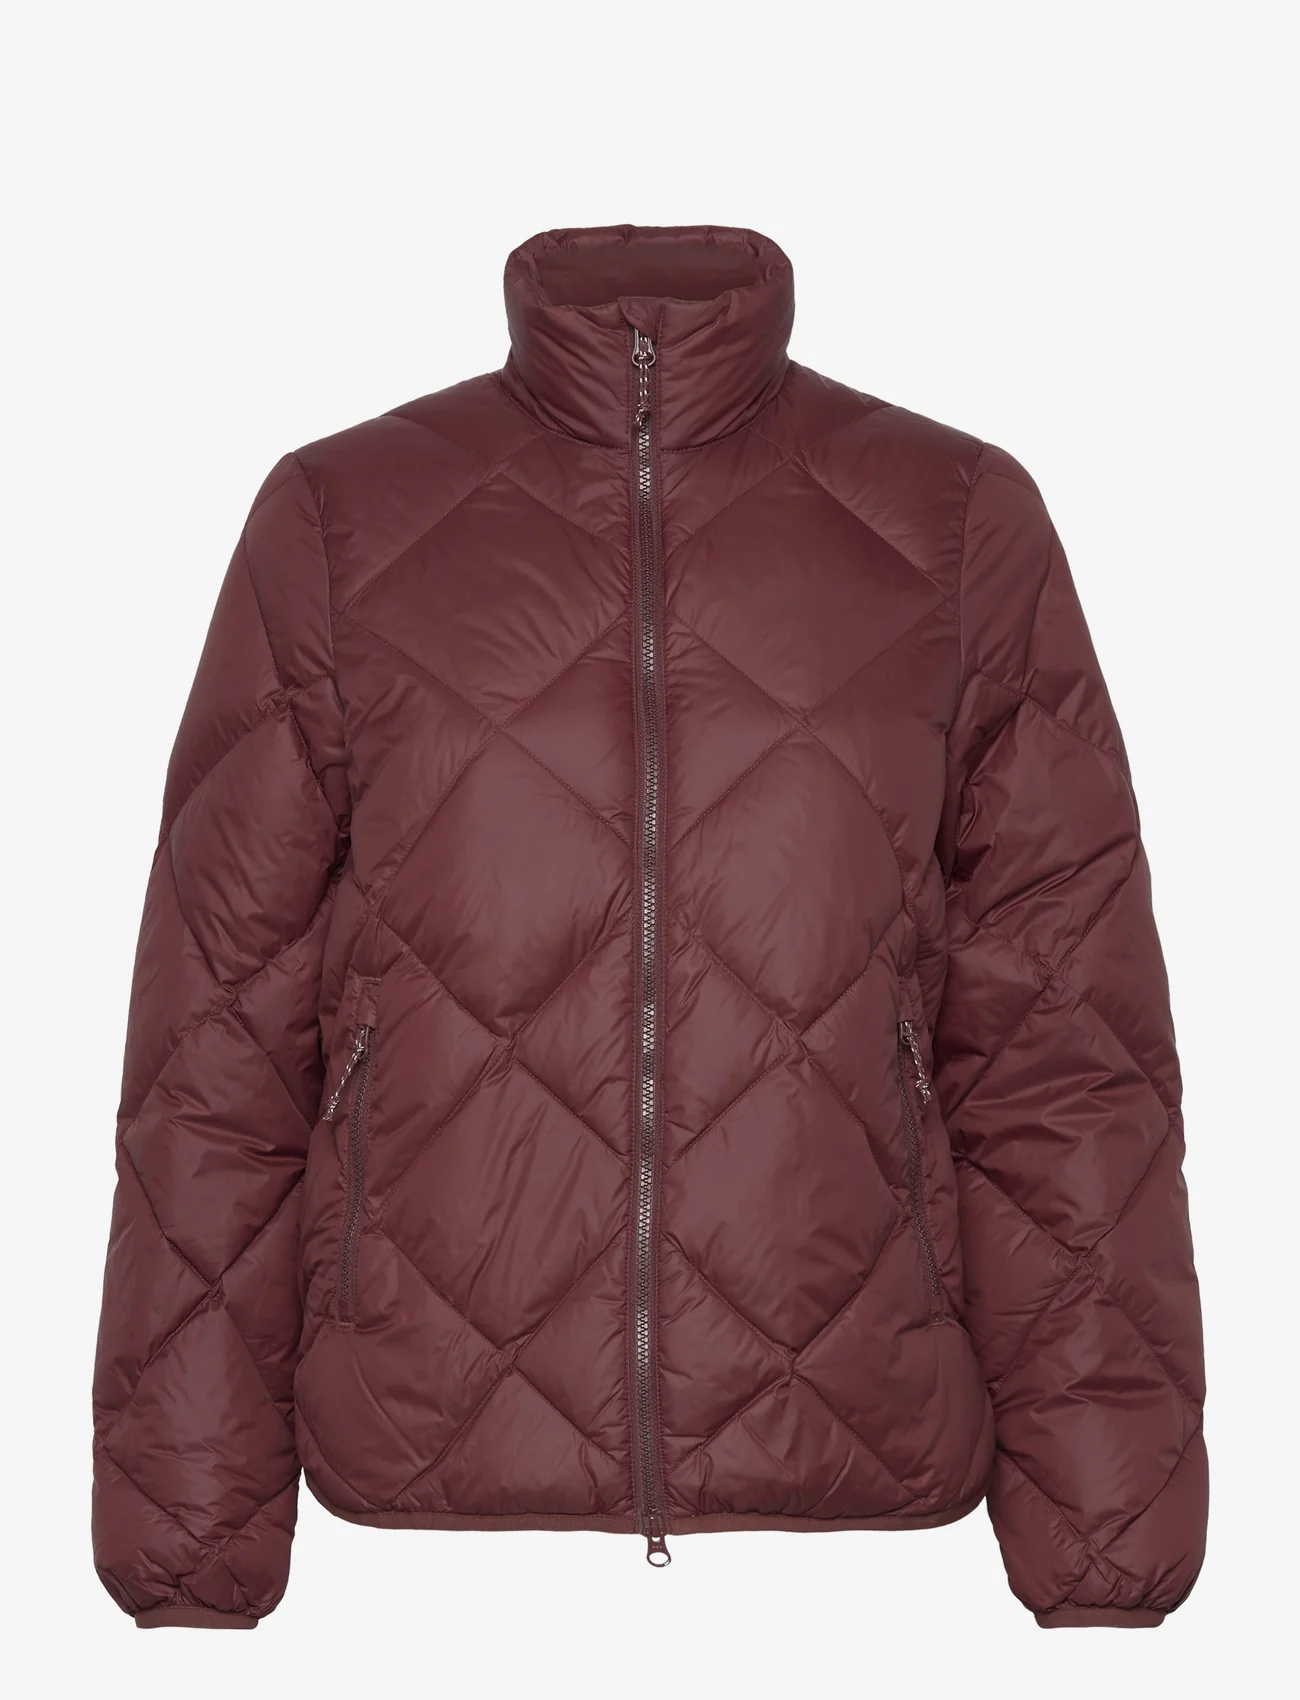 Peak Performance - W Mount Down Liner Jacket-SAPOTE - quilted jackets - sapote - 0